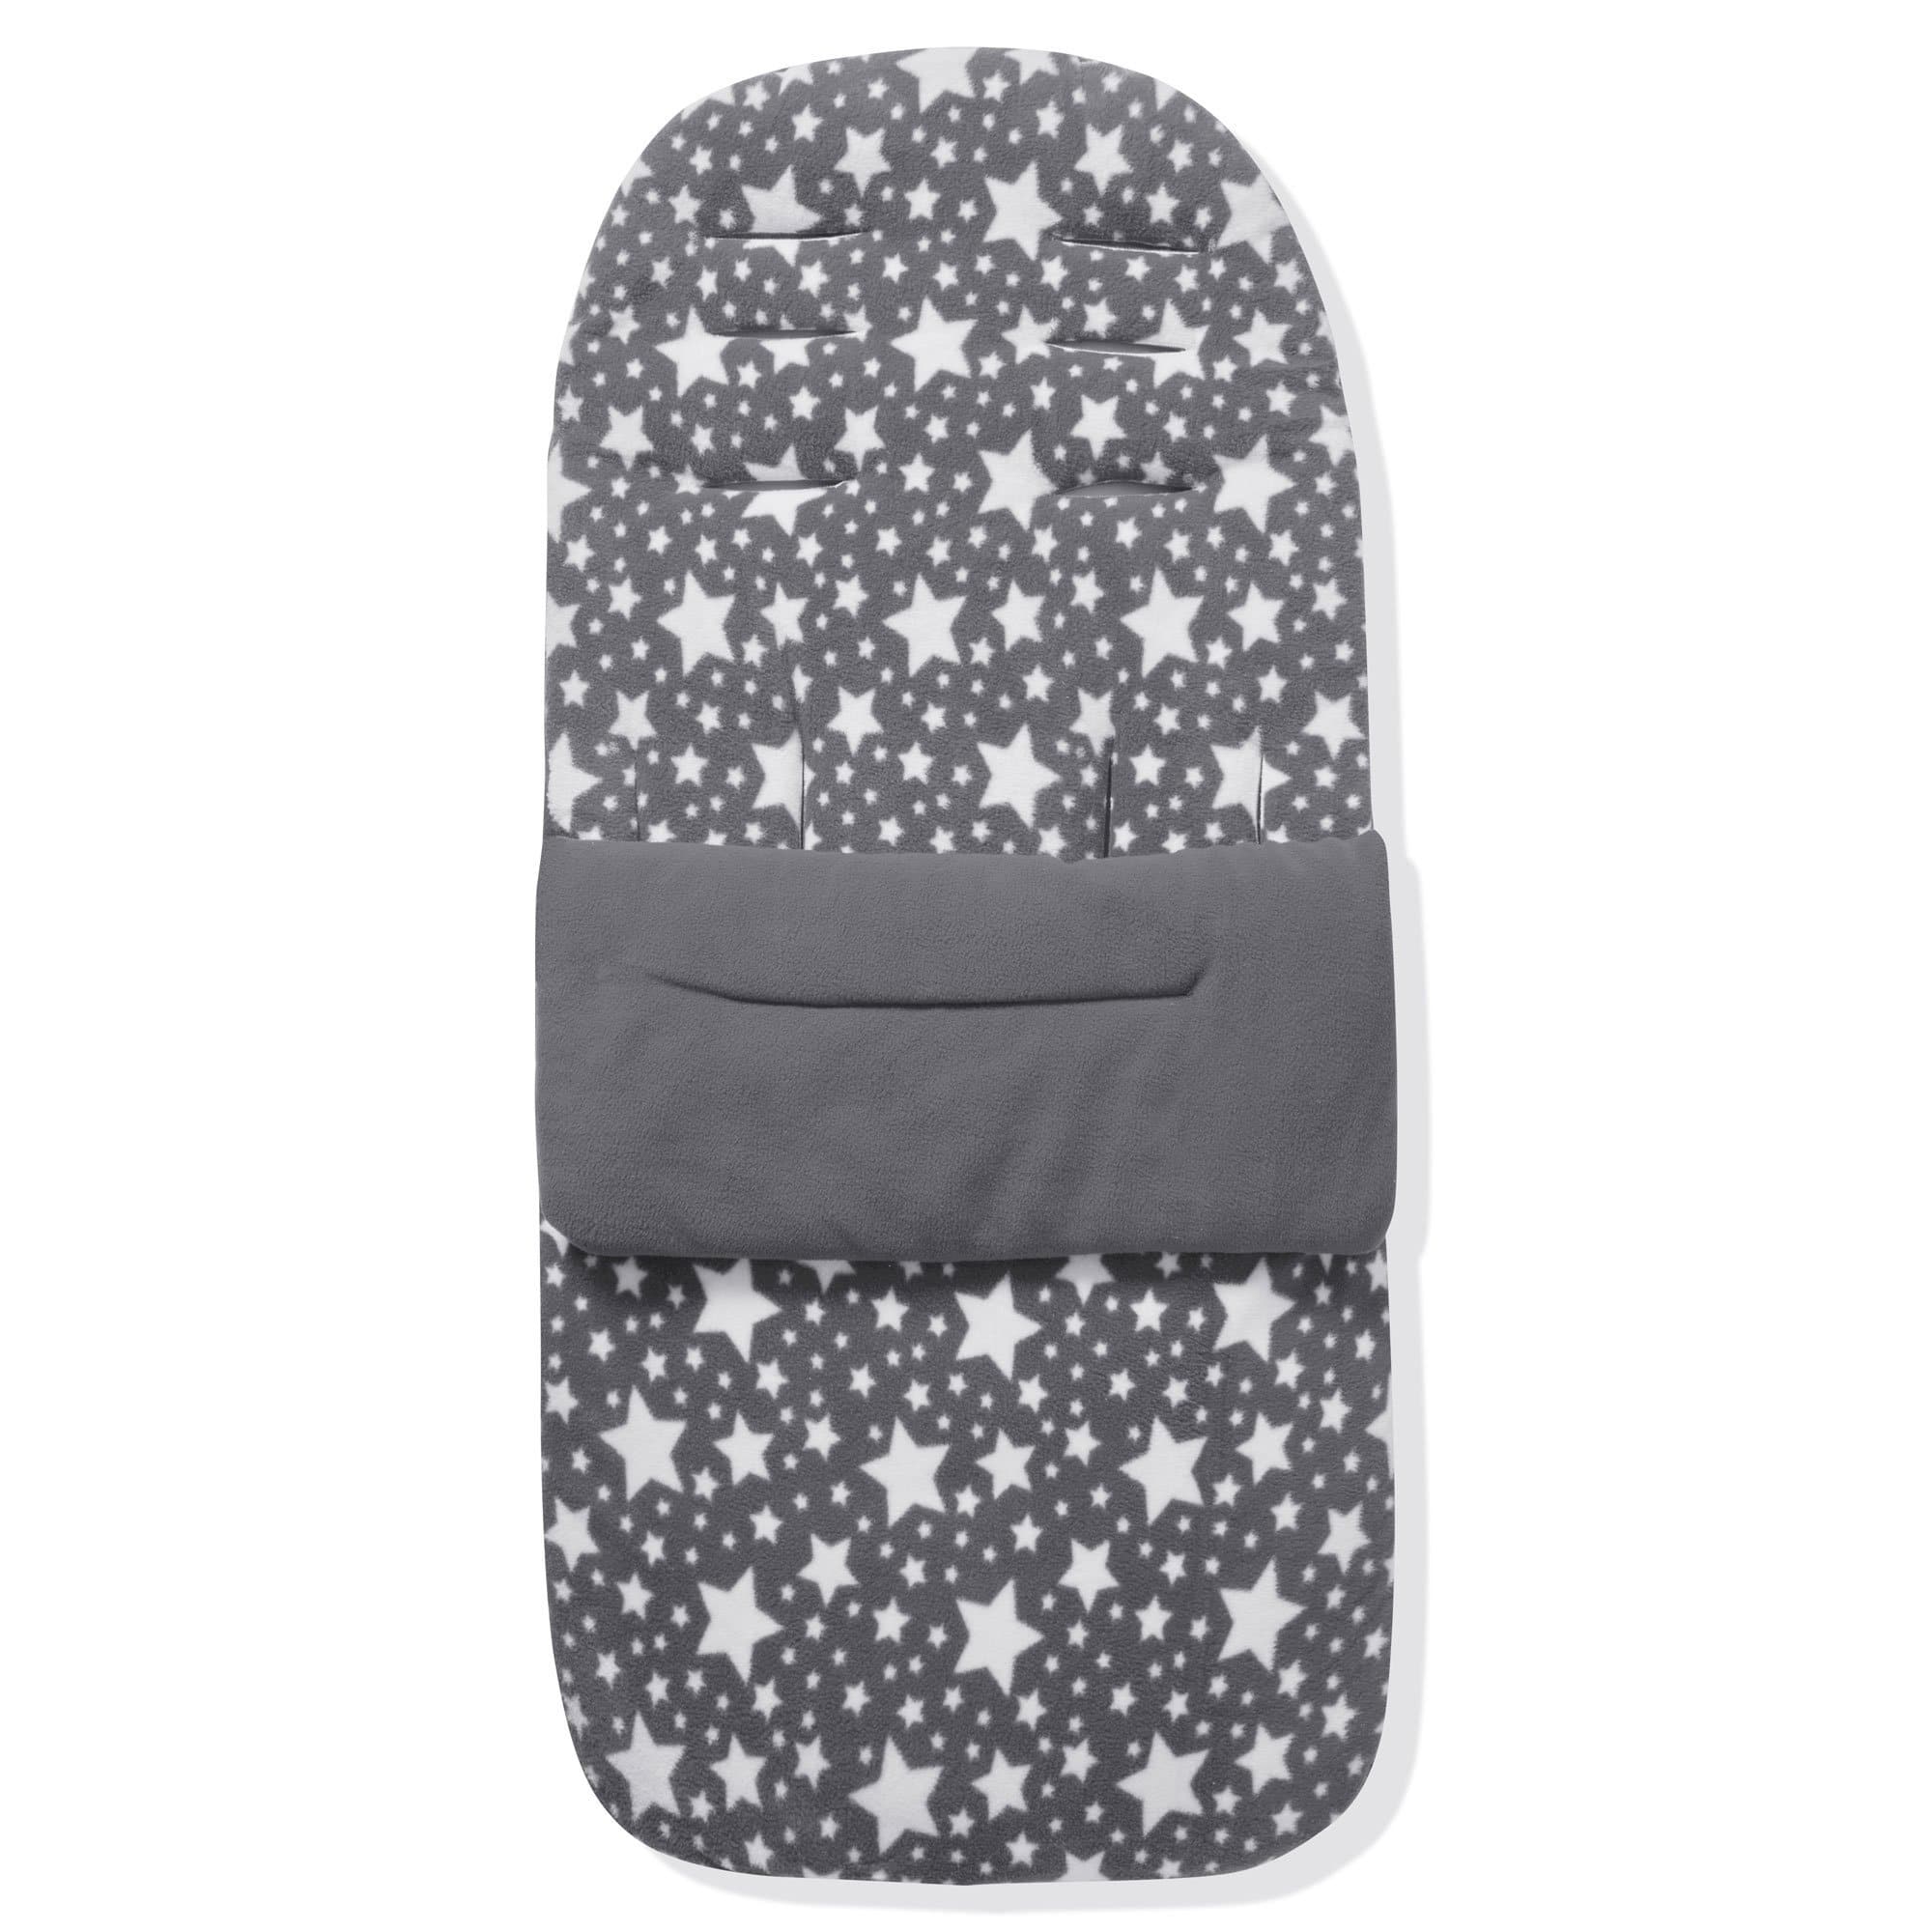 Fleece Footmuff / Cosy Toes Compatible with XTS - Grey Star / Fits All Models | For Your Little One